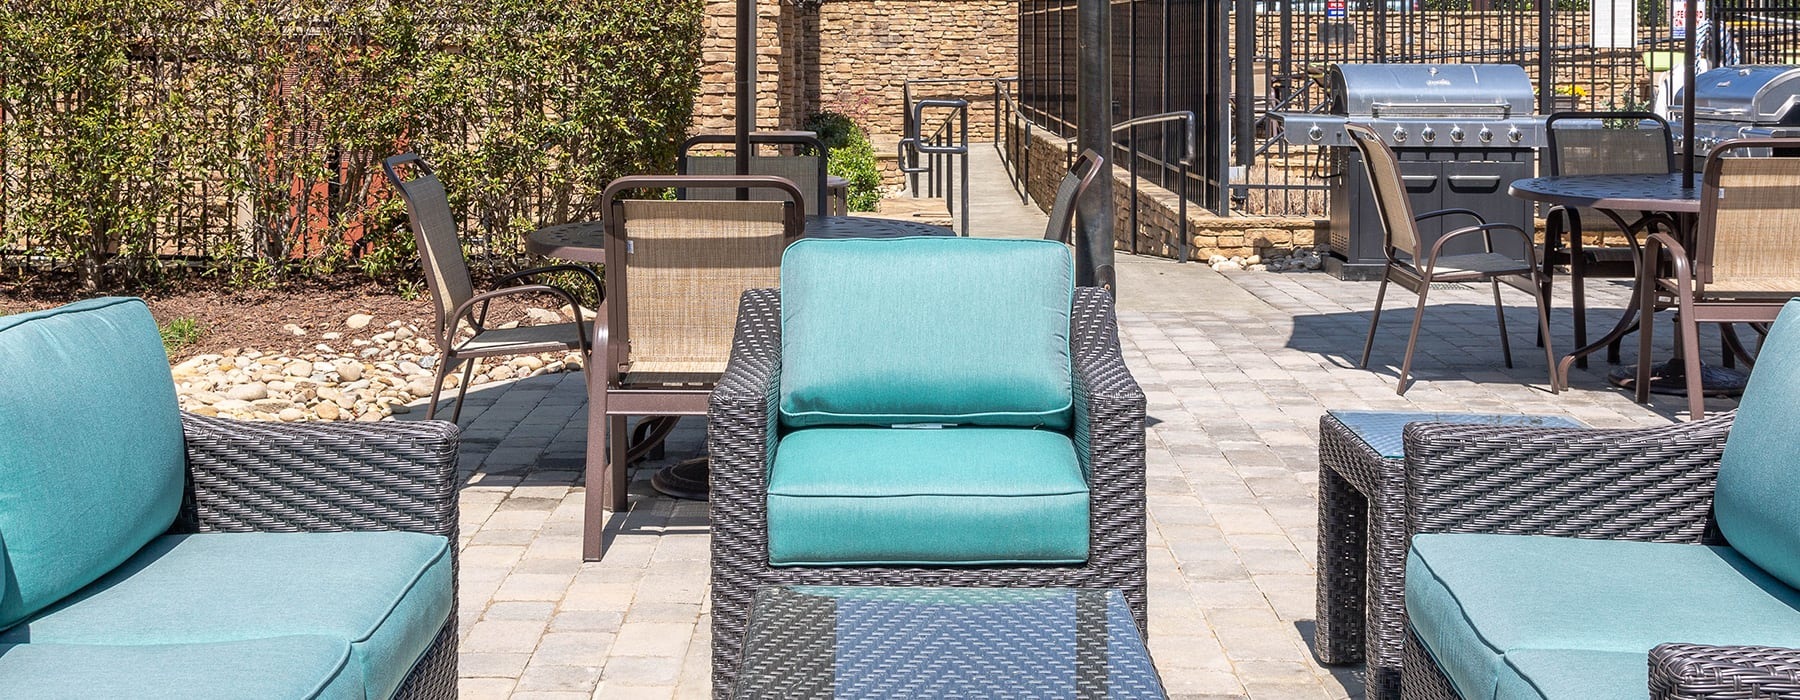 comfortable seating around the pool area